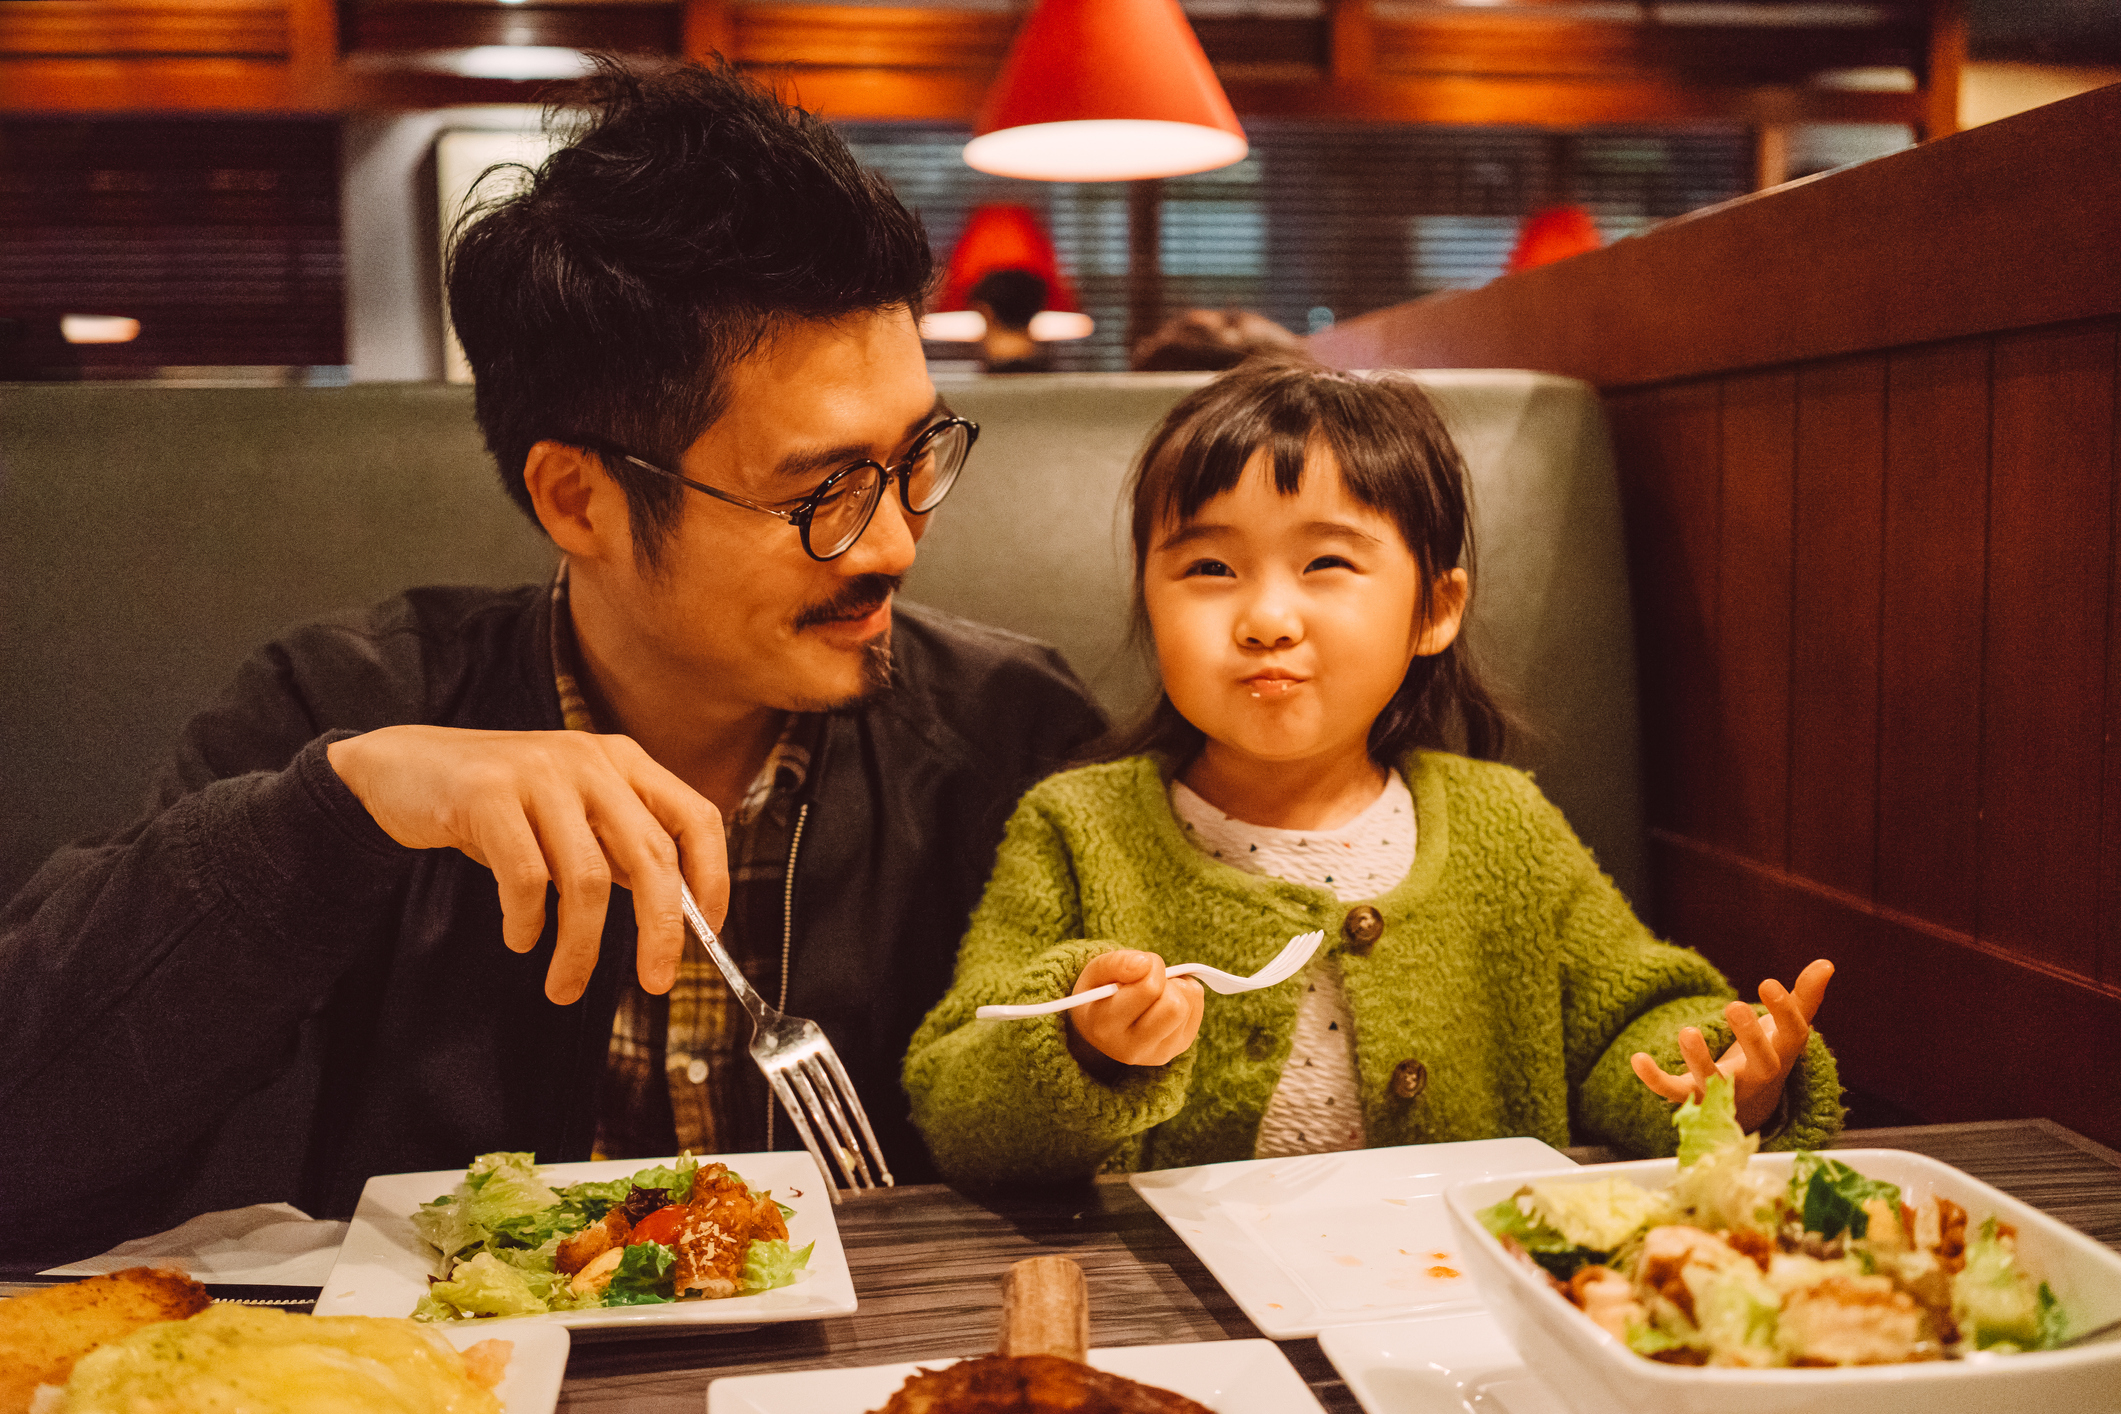 A father and daughter eating in a restaurant